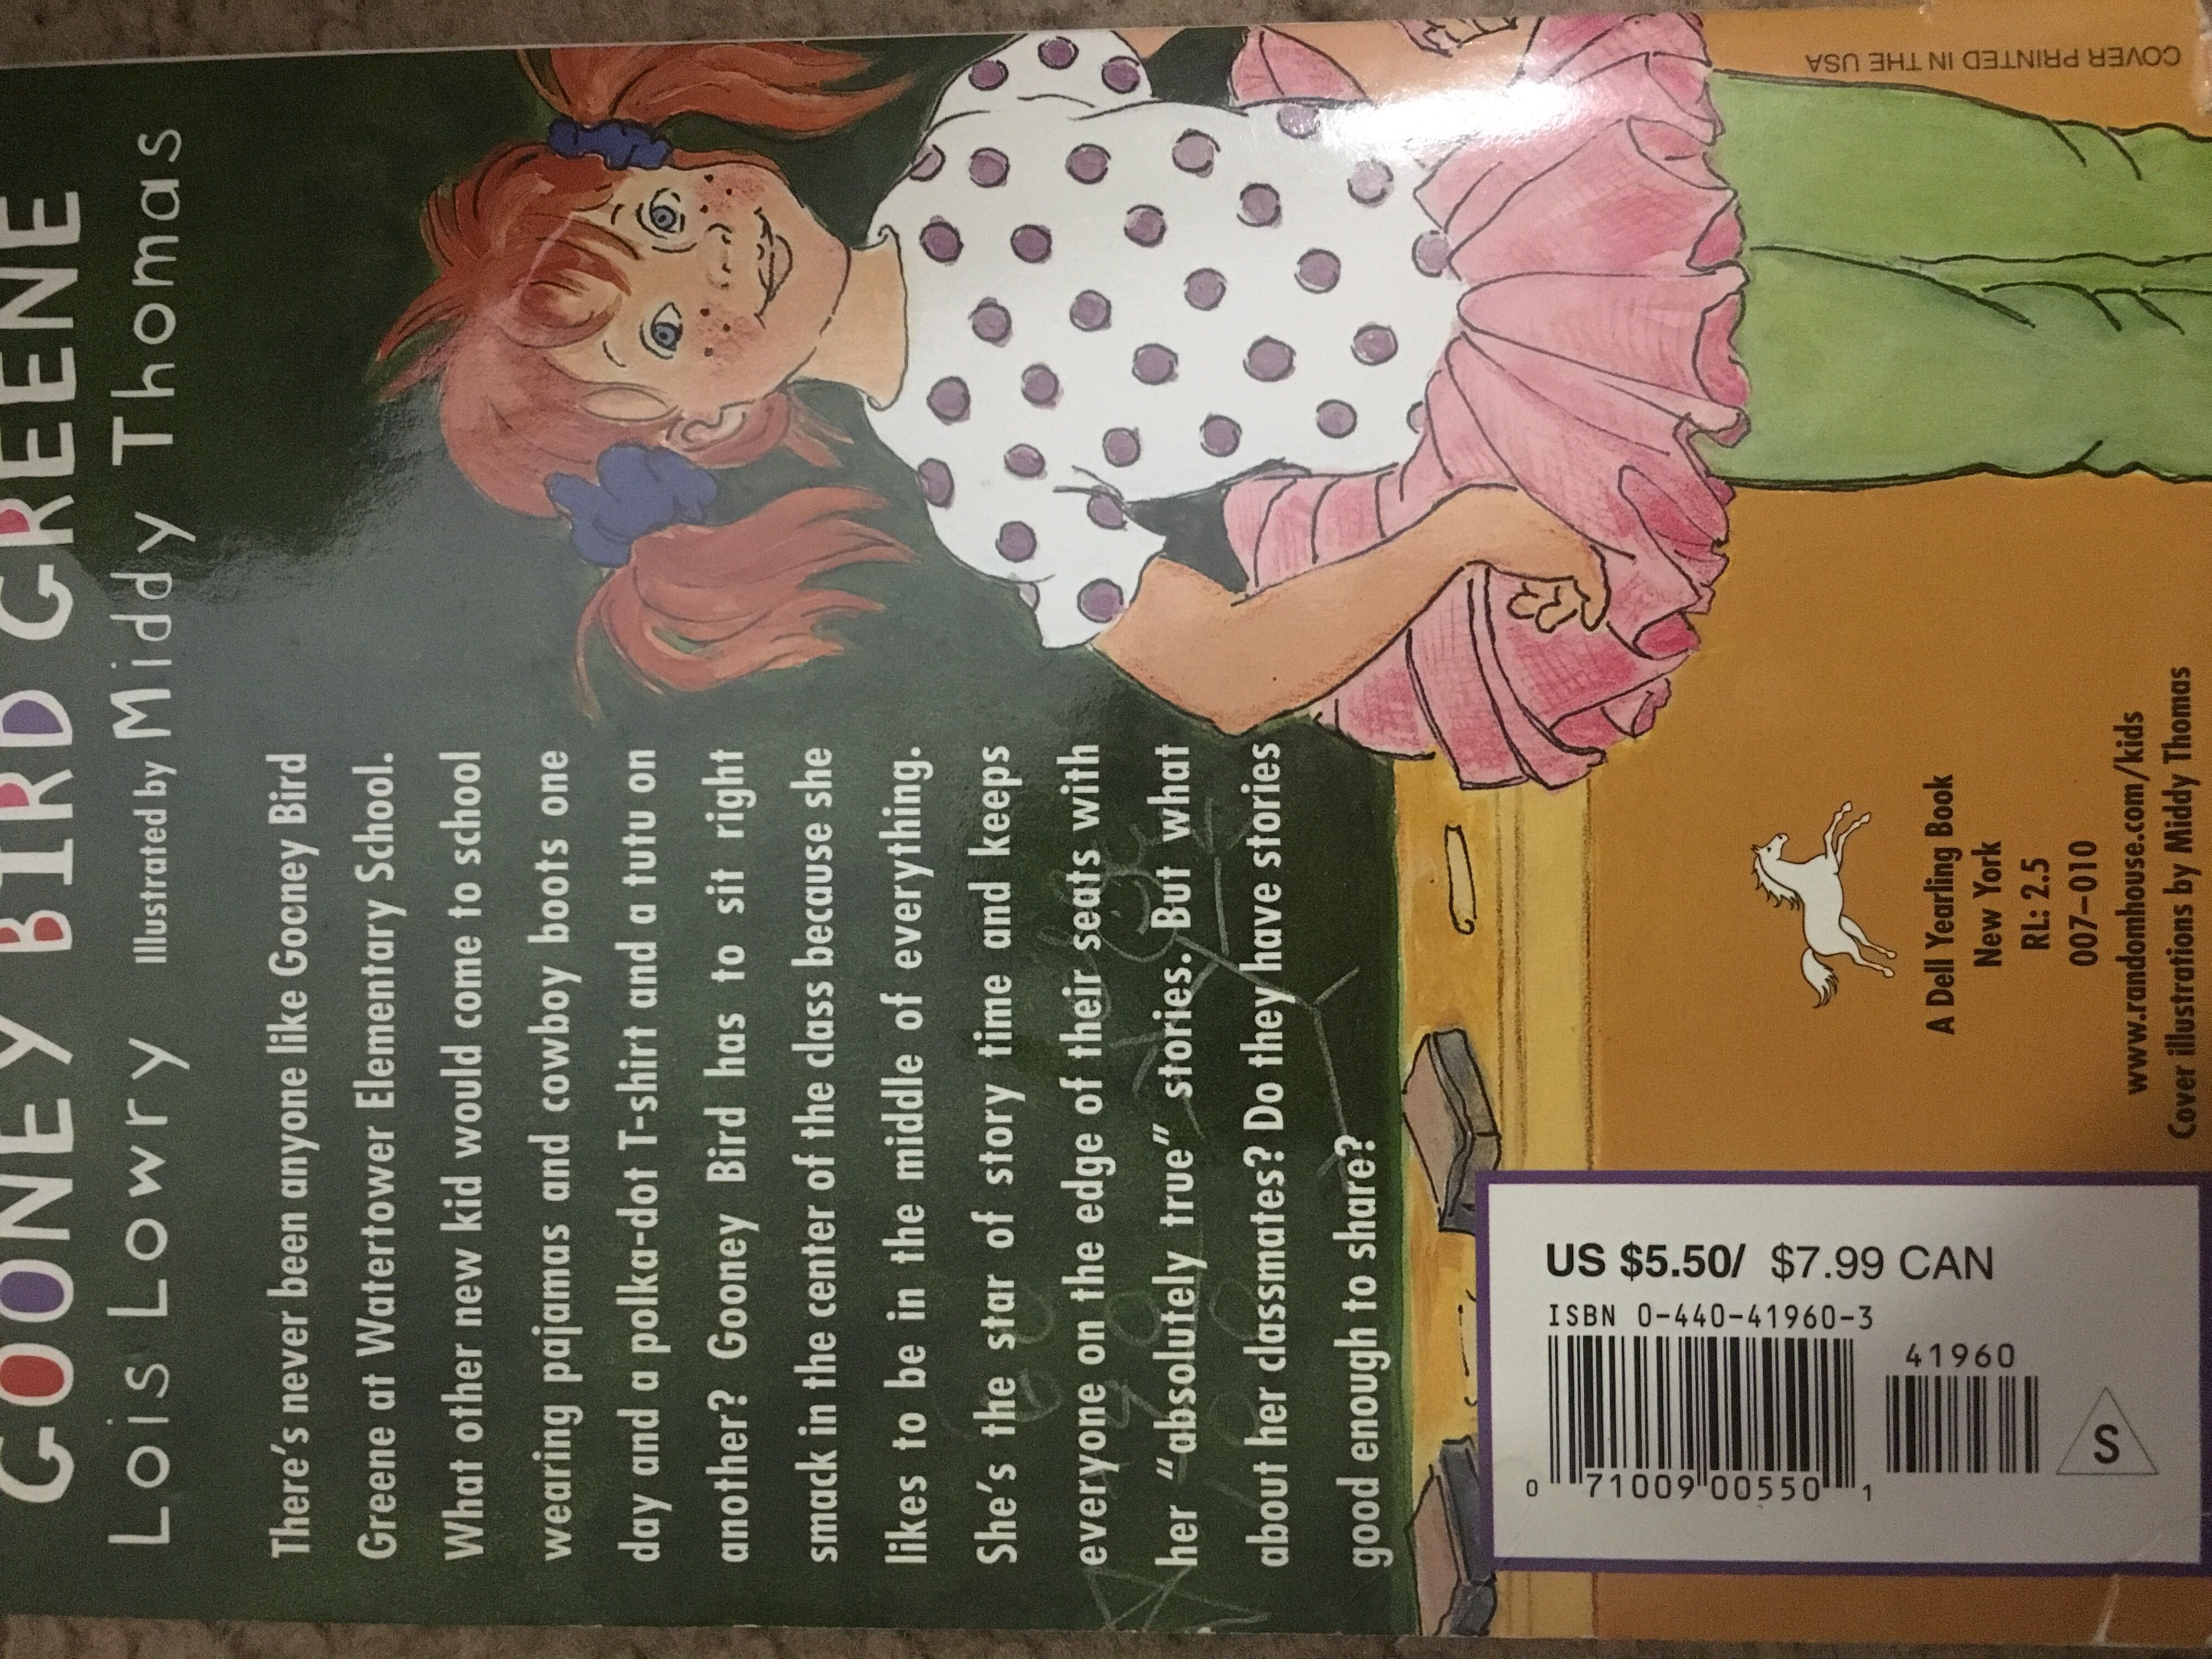 Gooney Bird Greene - Lois Lowry (A Dell Book - Paperback) book collectible [Barcode 9780440419600] - Main Image 2